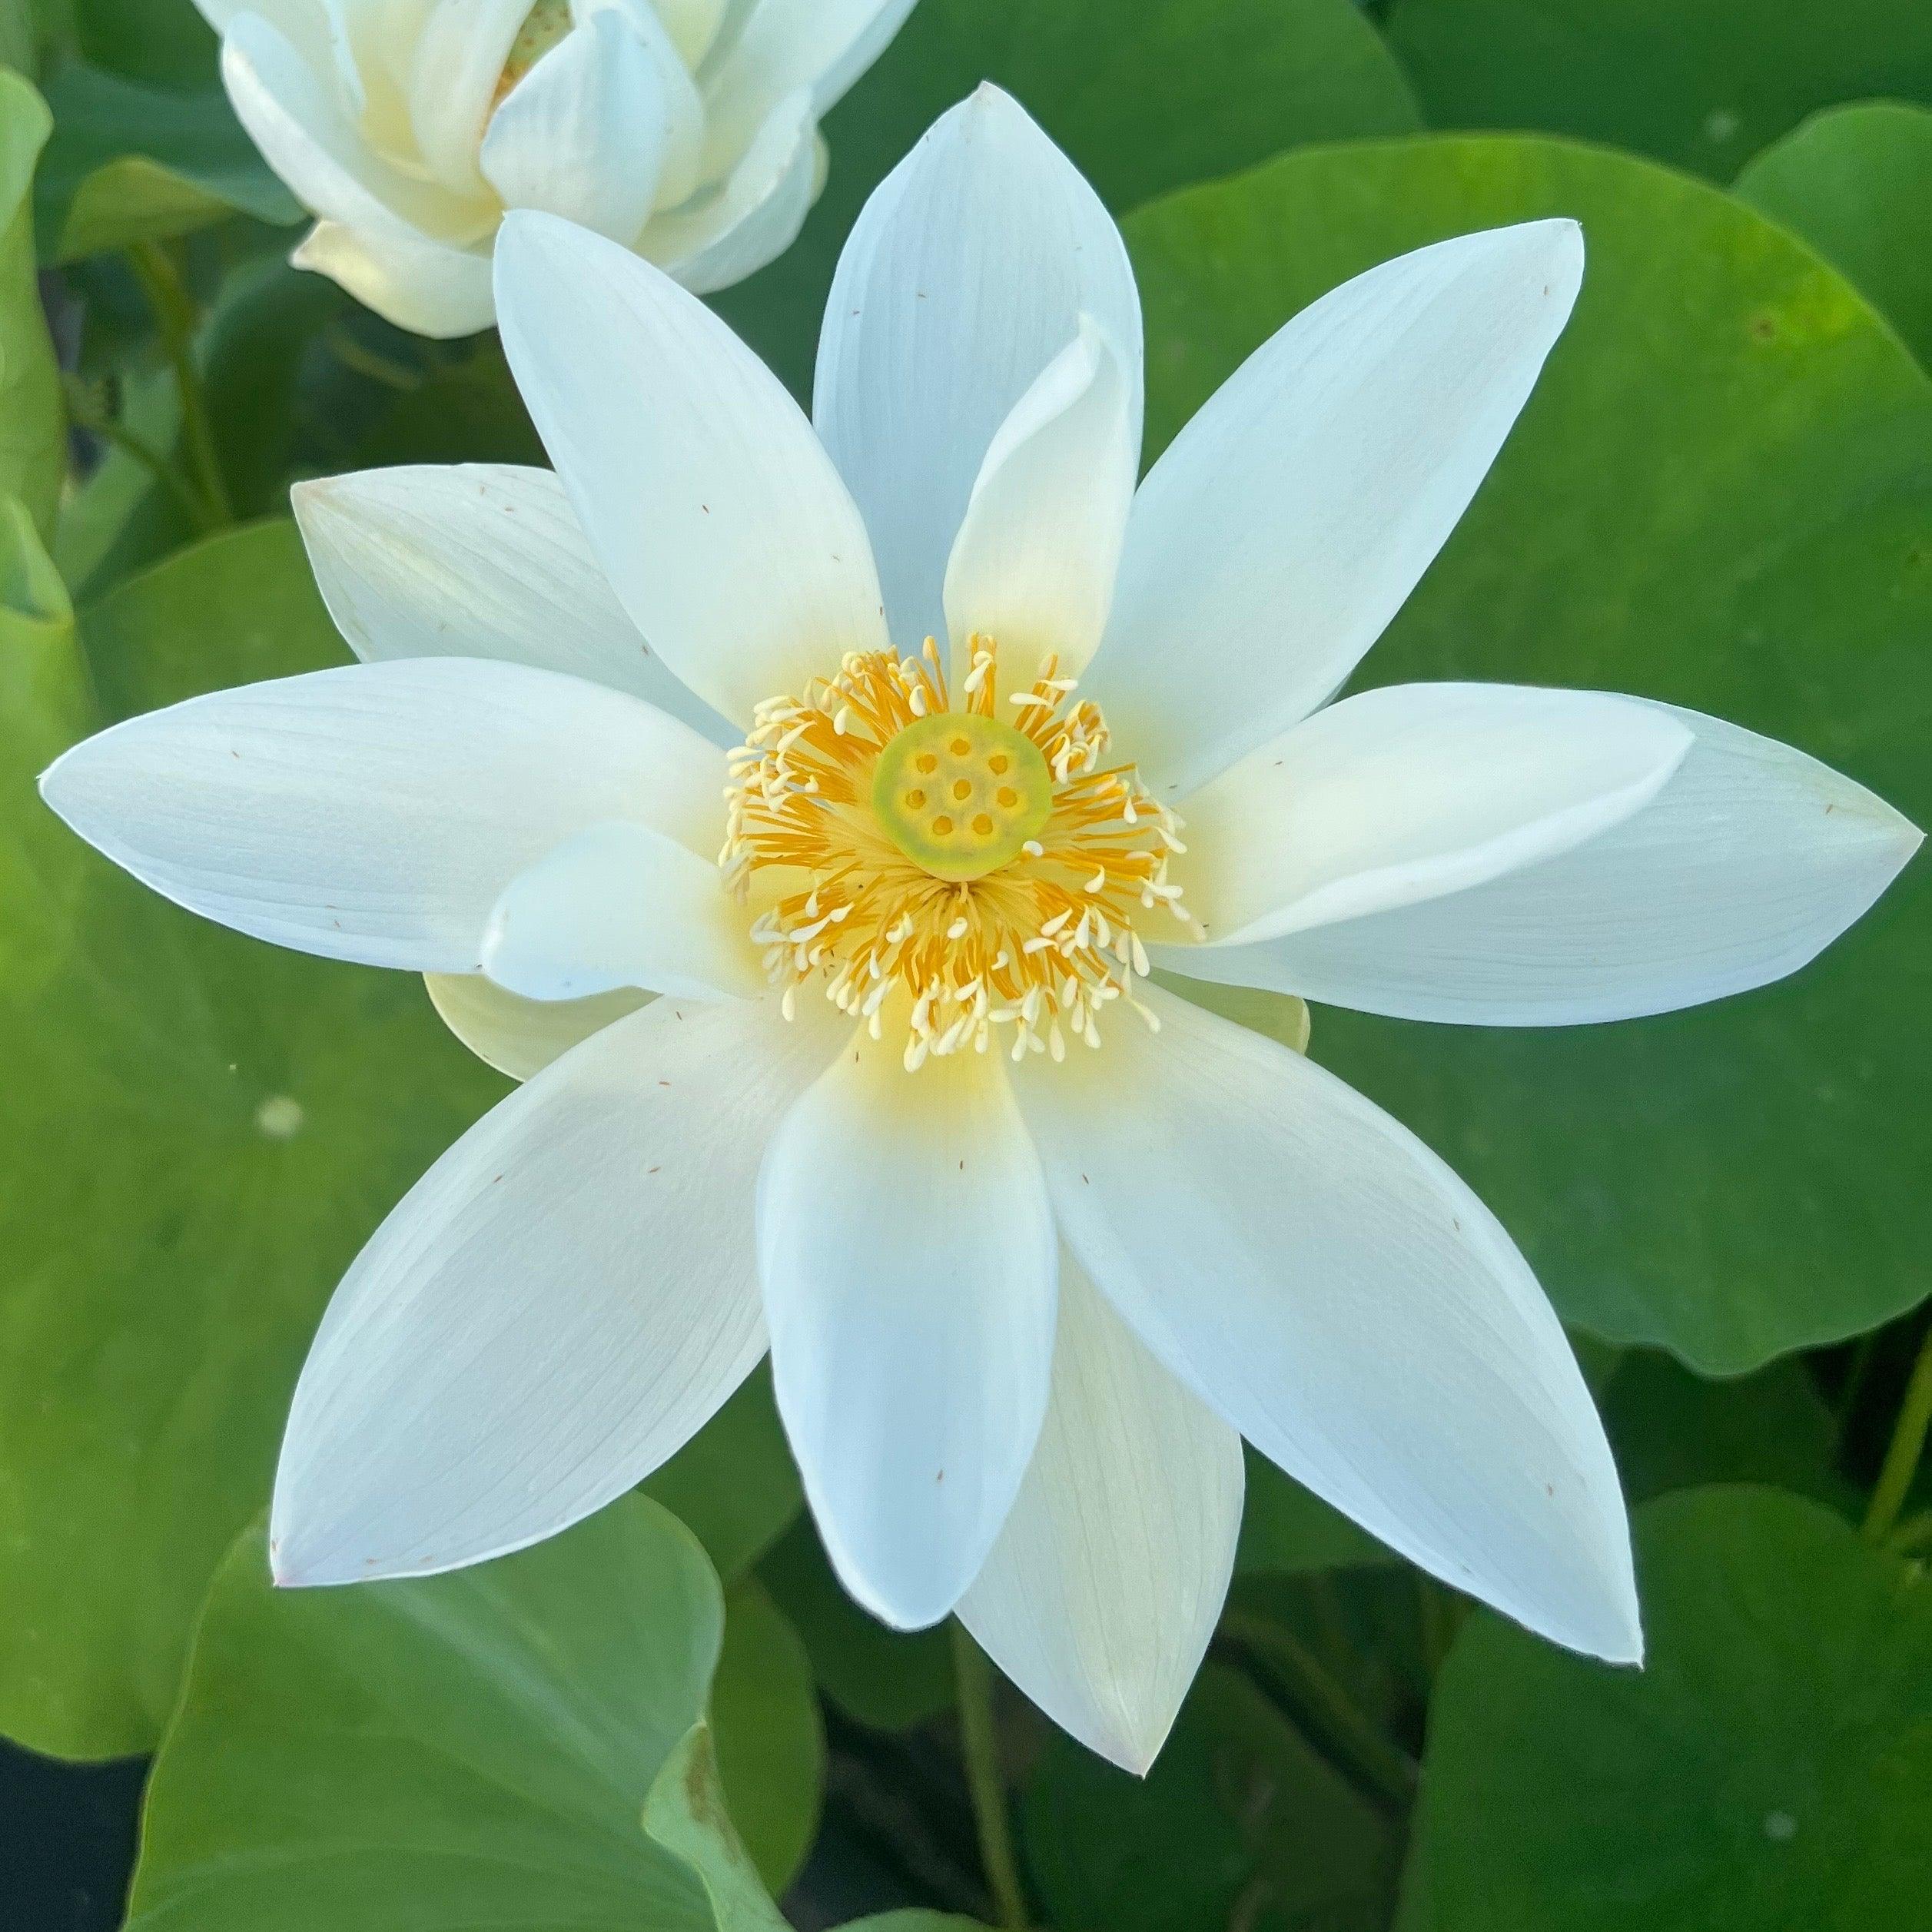 Sun on Snow - Gold and White Lotus (Bare Root) - Play It Koi